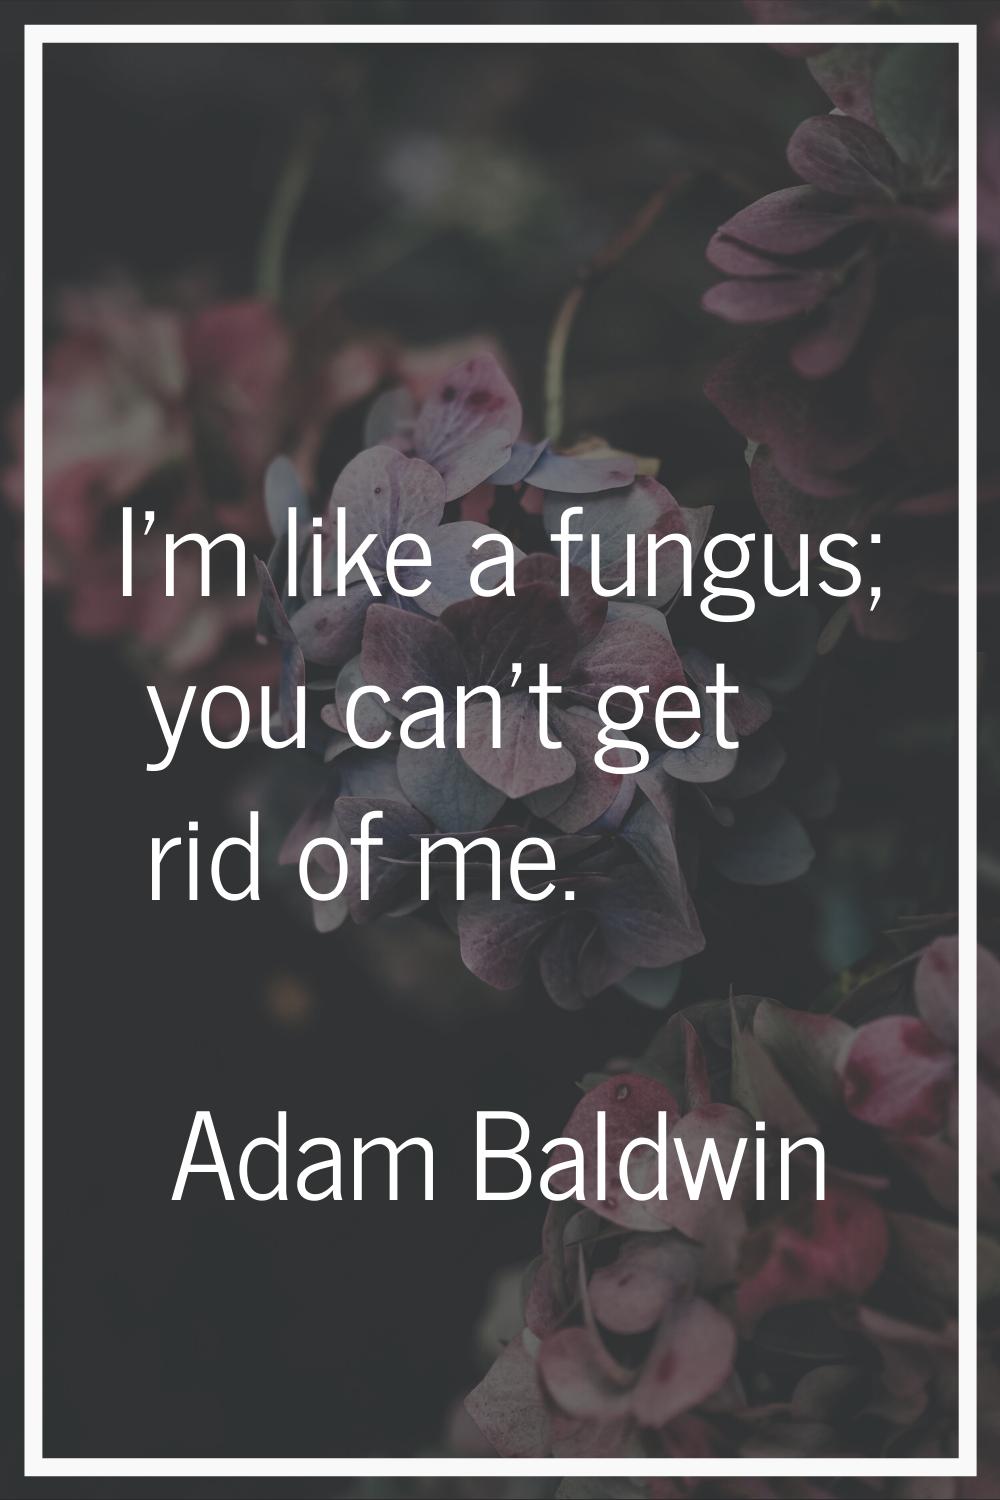 I'm like a fungus; you can't get rid of me.